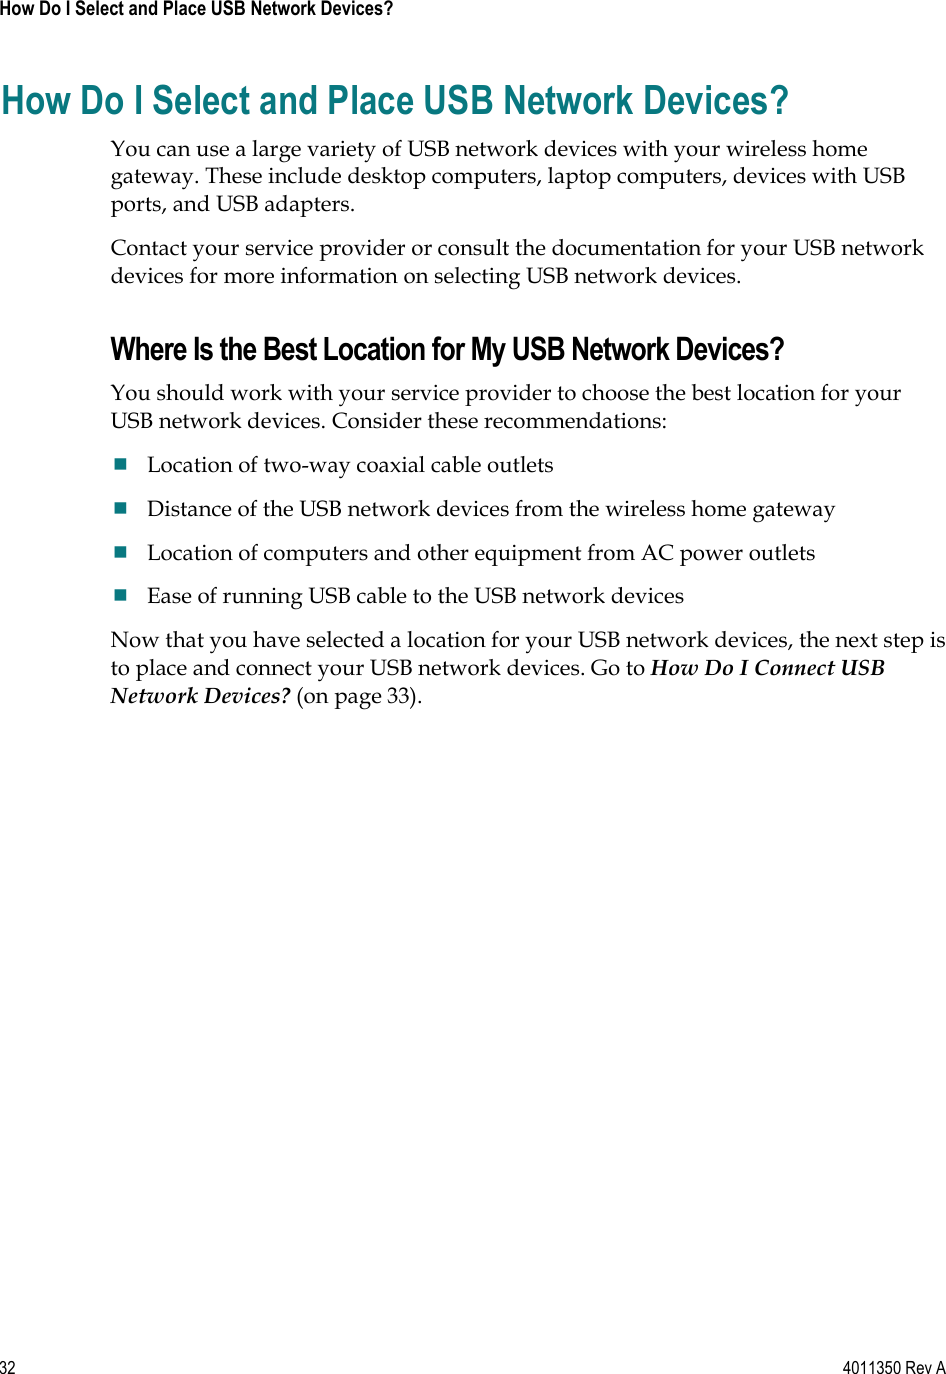 32    4011350 Rev A How Do I Select and Place USB Network Devices? How Do I Select and Place USB Network Devices? You can use a large variety of USB network devices with your wireless home gateway. These include desktop computers, laptop computers, devices with USB ports, and USB adapters.  Contact your service provider or consult the documentation for your USB network devices for more information on selecting USB network devices. Where Is the Best Location for My USB Network Devices? You should work with your service provider to choose the best location for your USB network devices. Consider these recommendations: Location of two-way coaxial cable outlets Distance of the USB network devices from the wireless home gateway Location of computers and other equipment from AC power outlets Ease of running USB cable to the USB network devices Now that you have selected a location for your USB network devices, the next step is to place and connect your USB network devices. Go to How Do I Connect USB Network Devices? (on page 33).